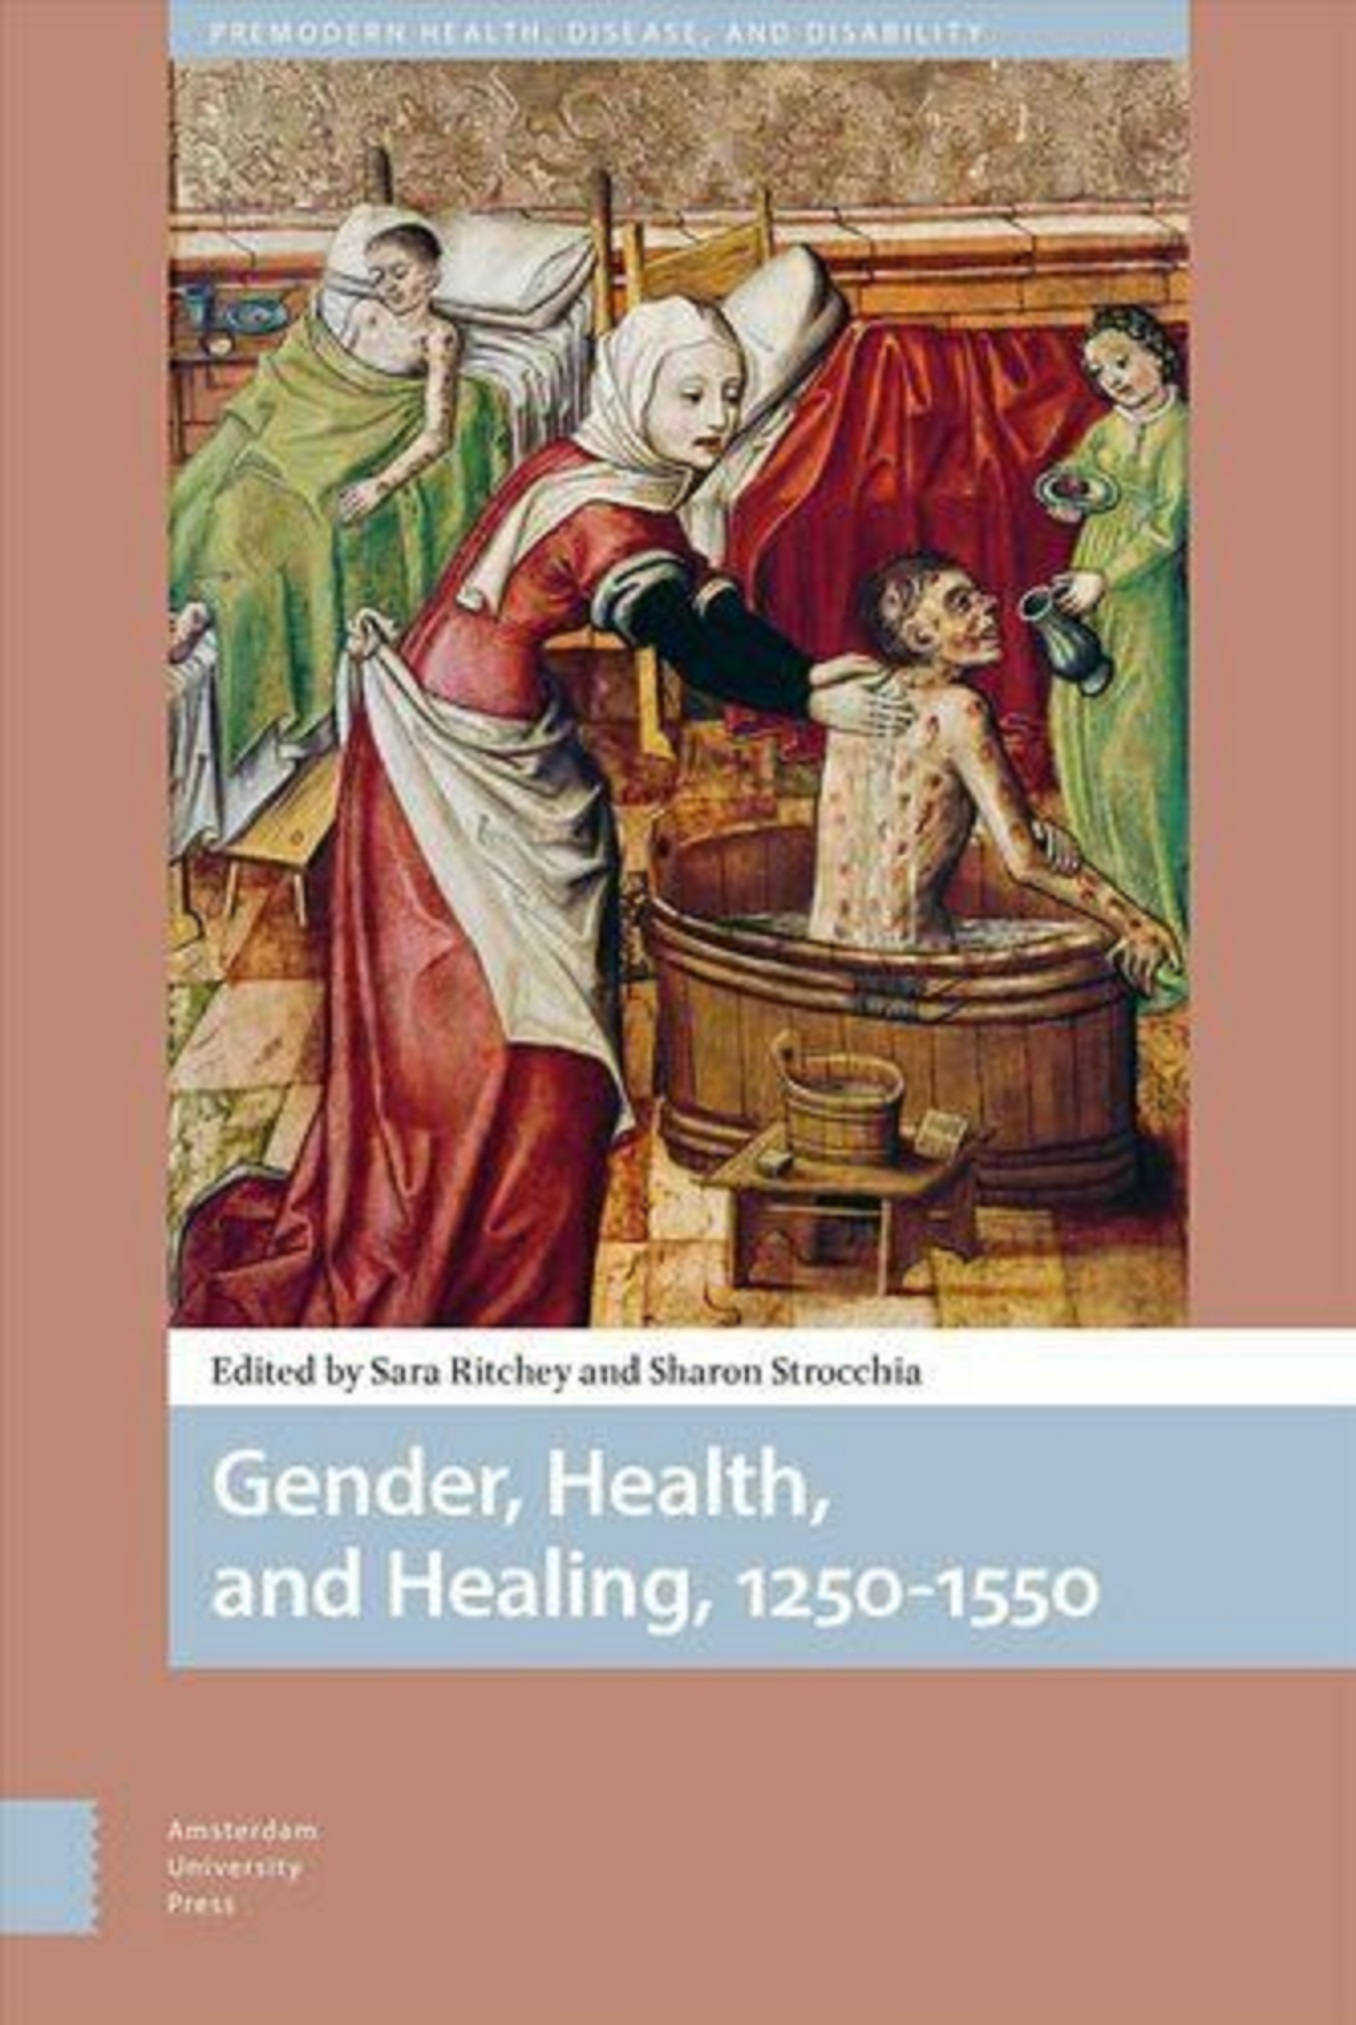 Gender, Health, and Healing